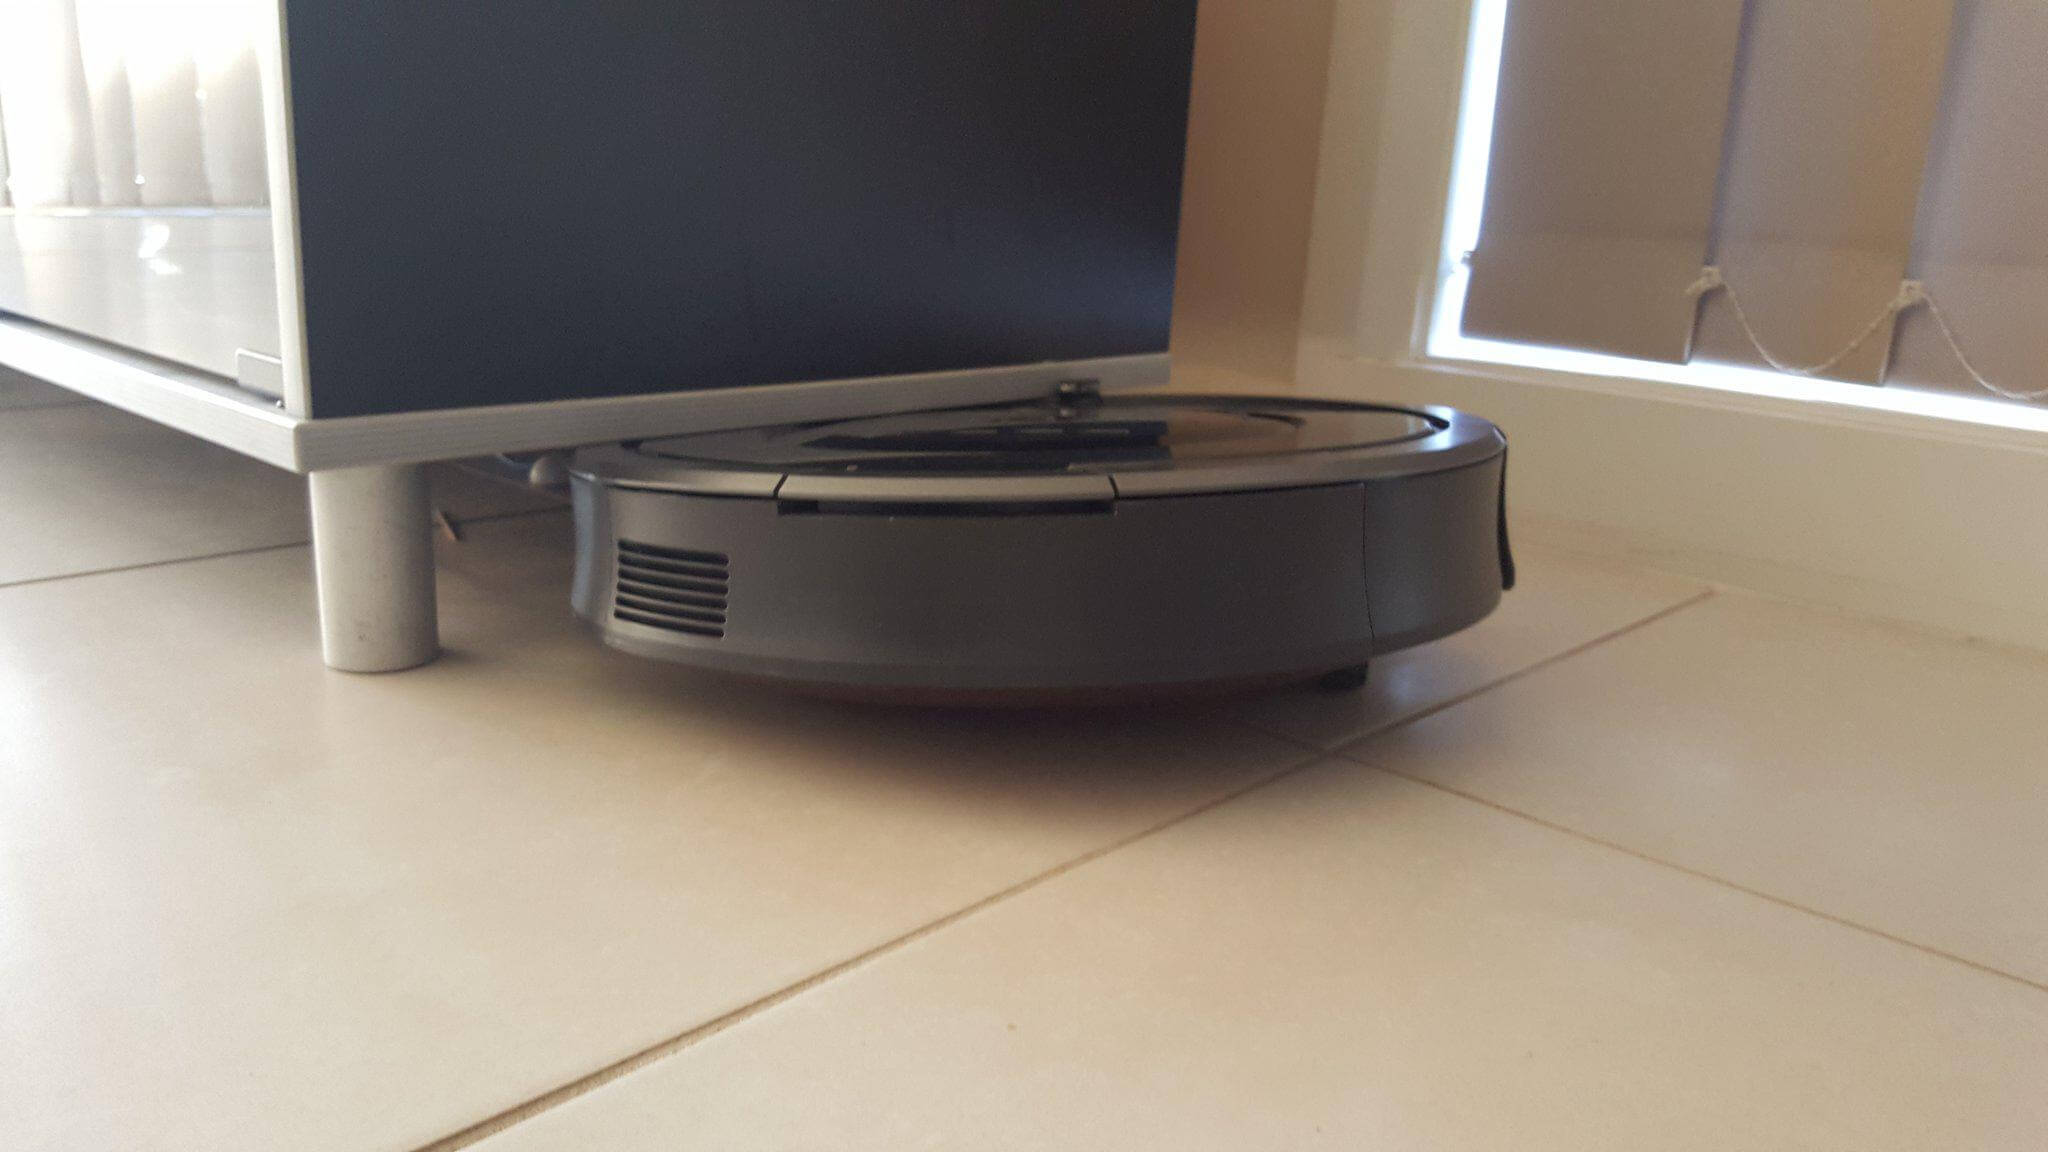 How To Keep Robot Vacuum From Getting Stuck Under Furniture